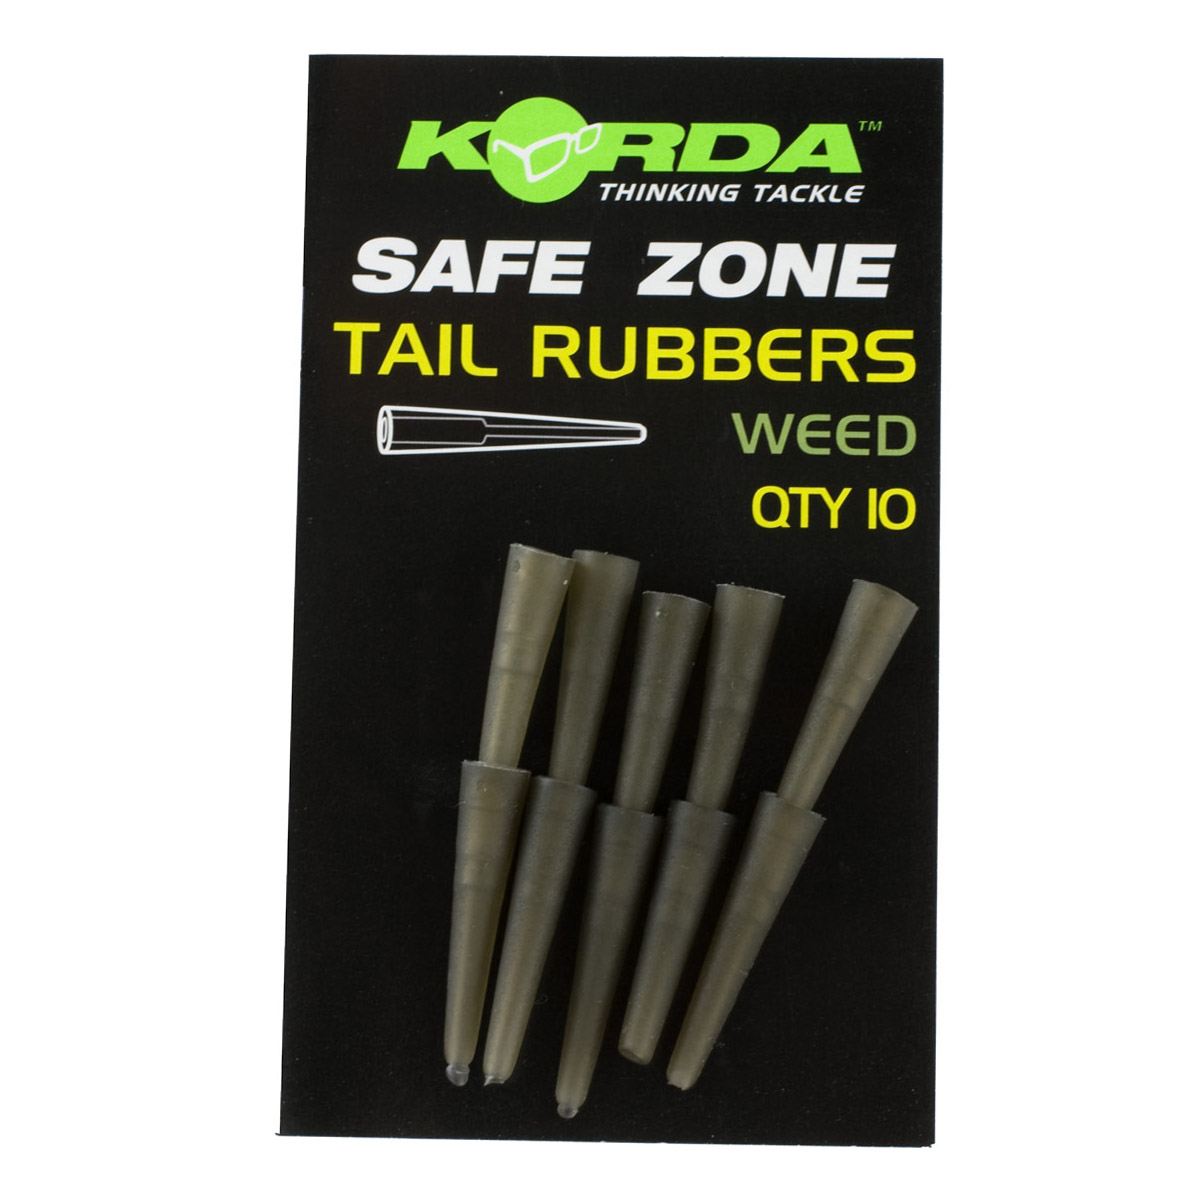 Korda Safe Zone Tail Rubbers -  Weed